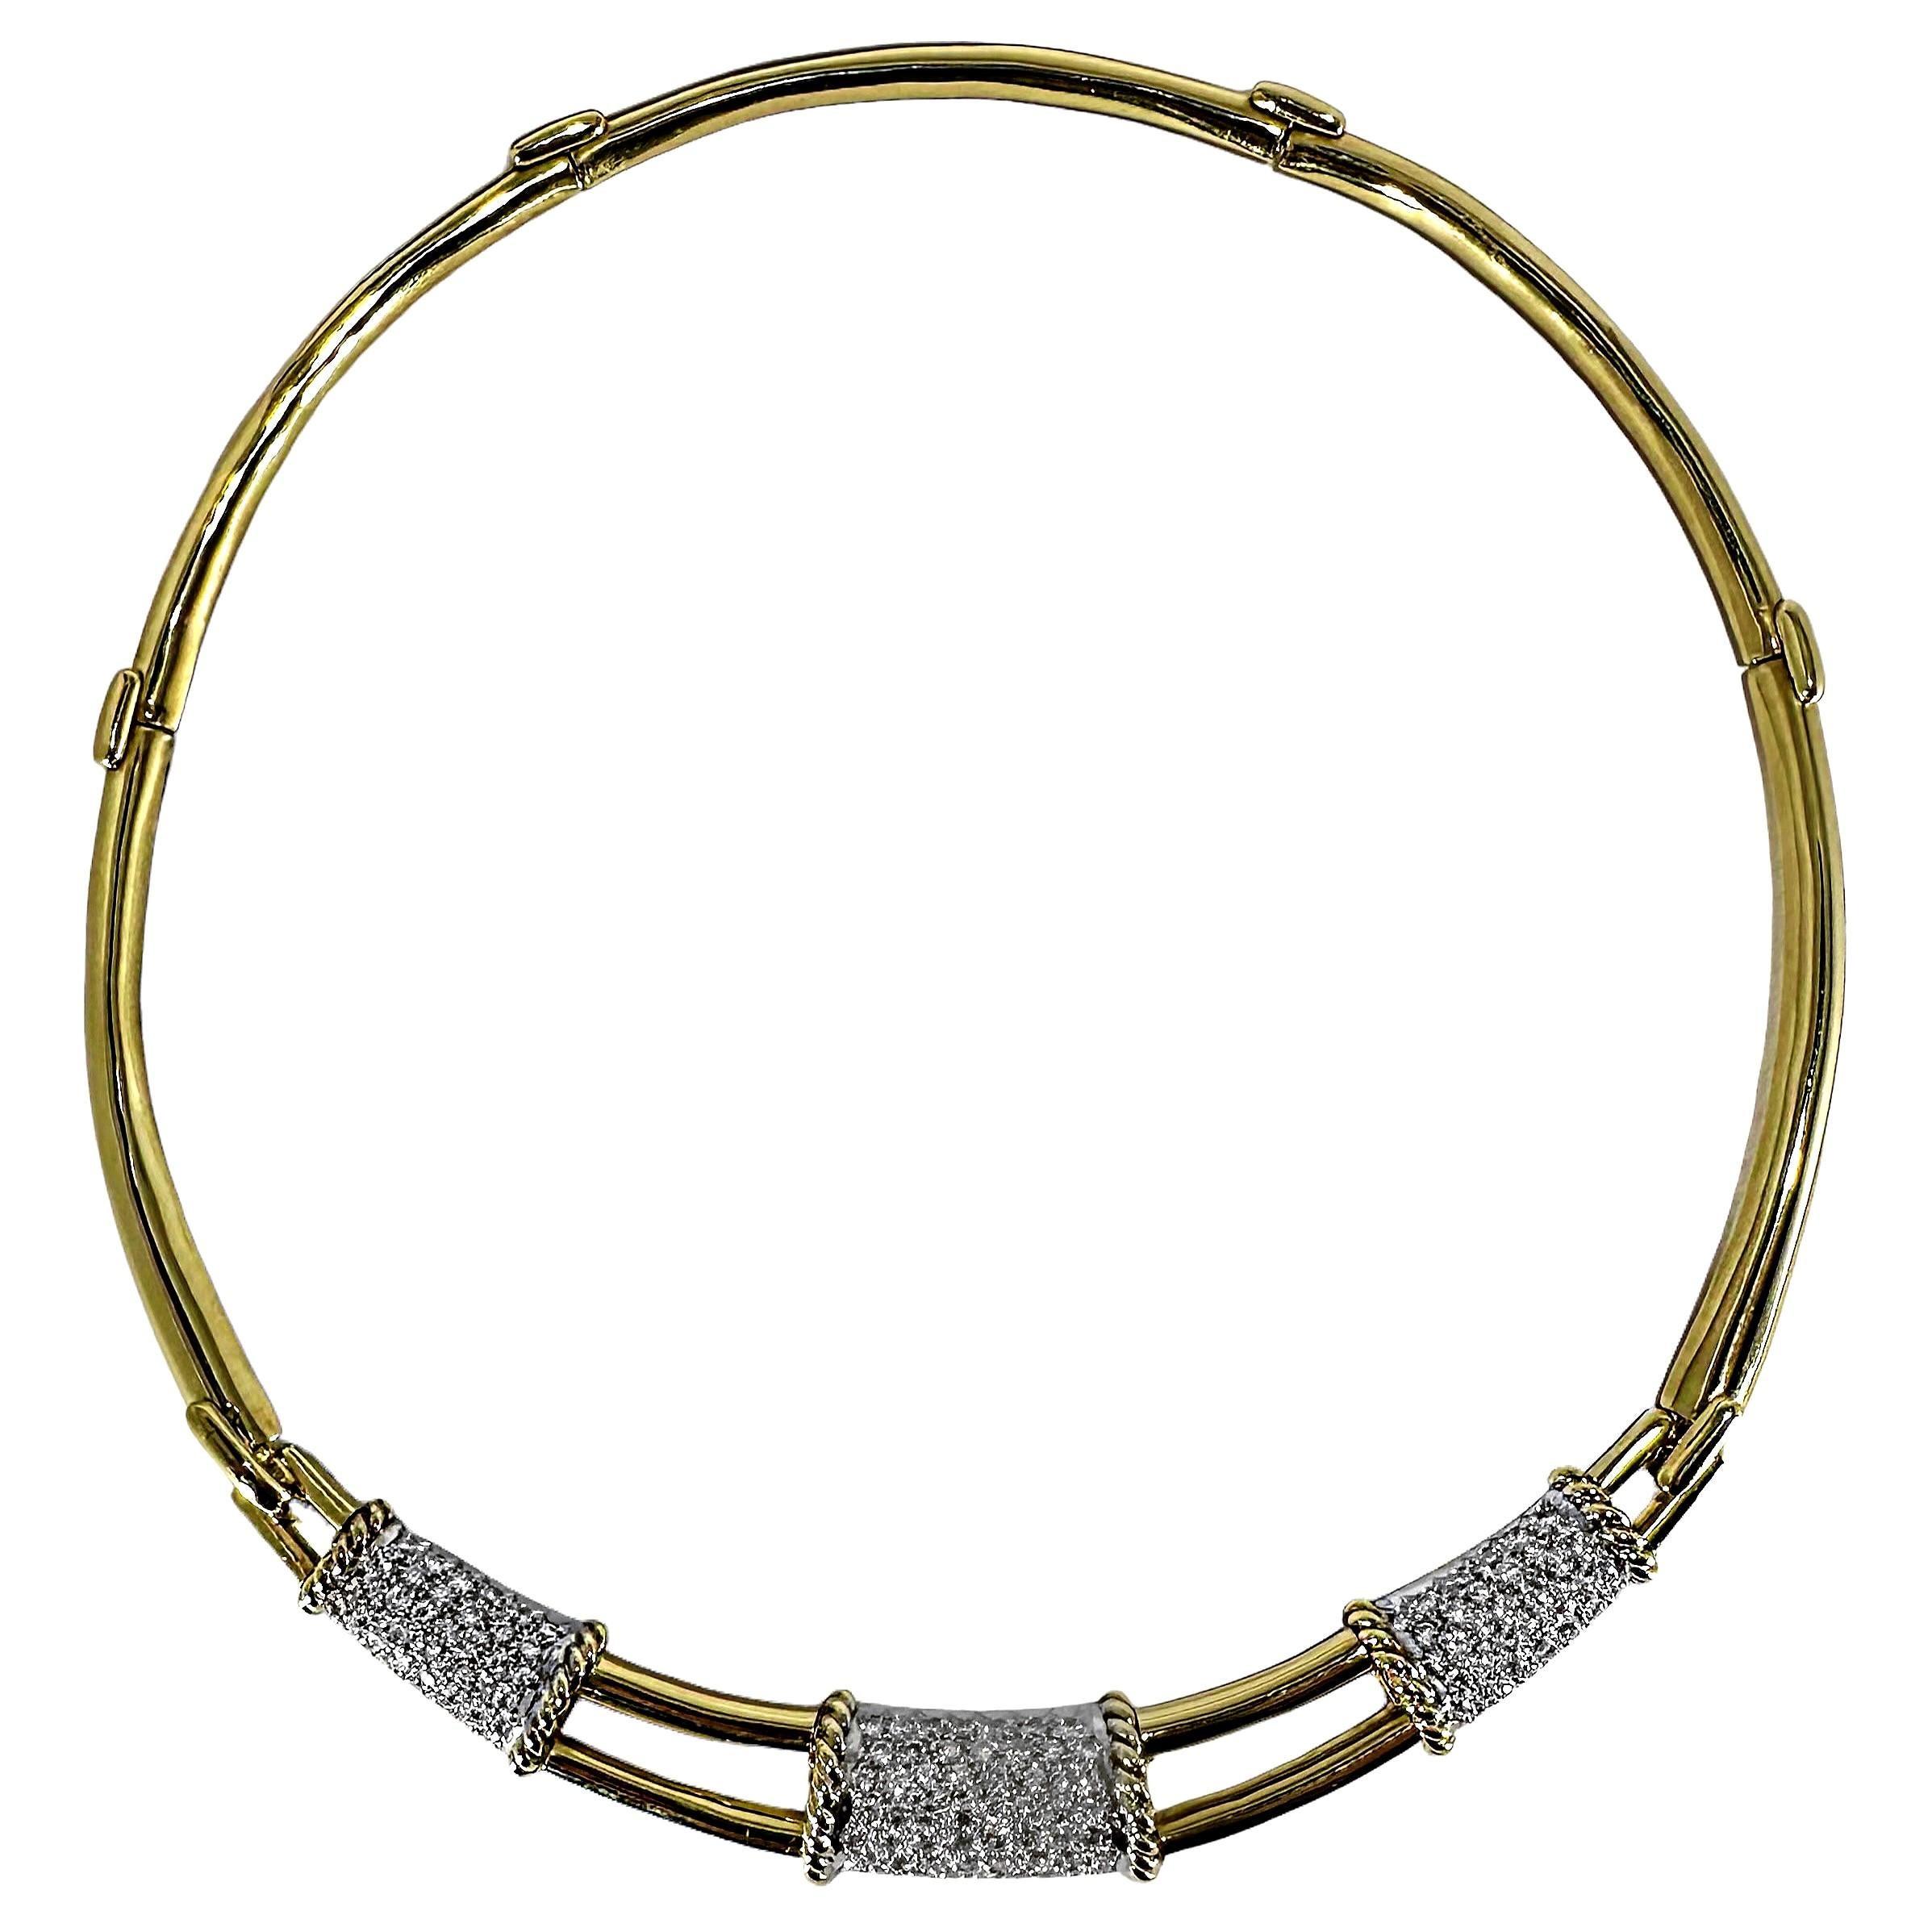 This striking, 18K yellow gold and diamond, Mid-20th Century cocktail necklace is ideal for either daytime or evening wear. At a maximum width of 1/2 inch at the very front, it is not overwhelming nor is it diminutive. It is deftly crafted with